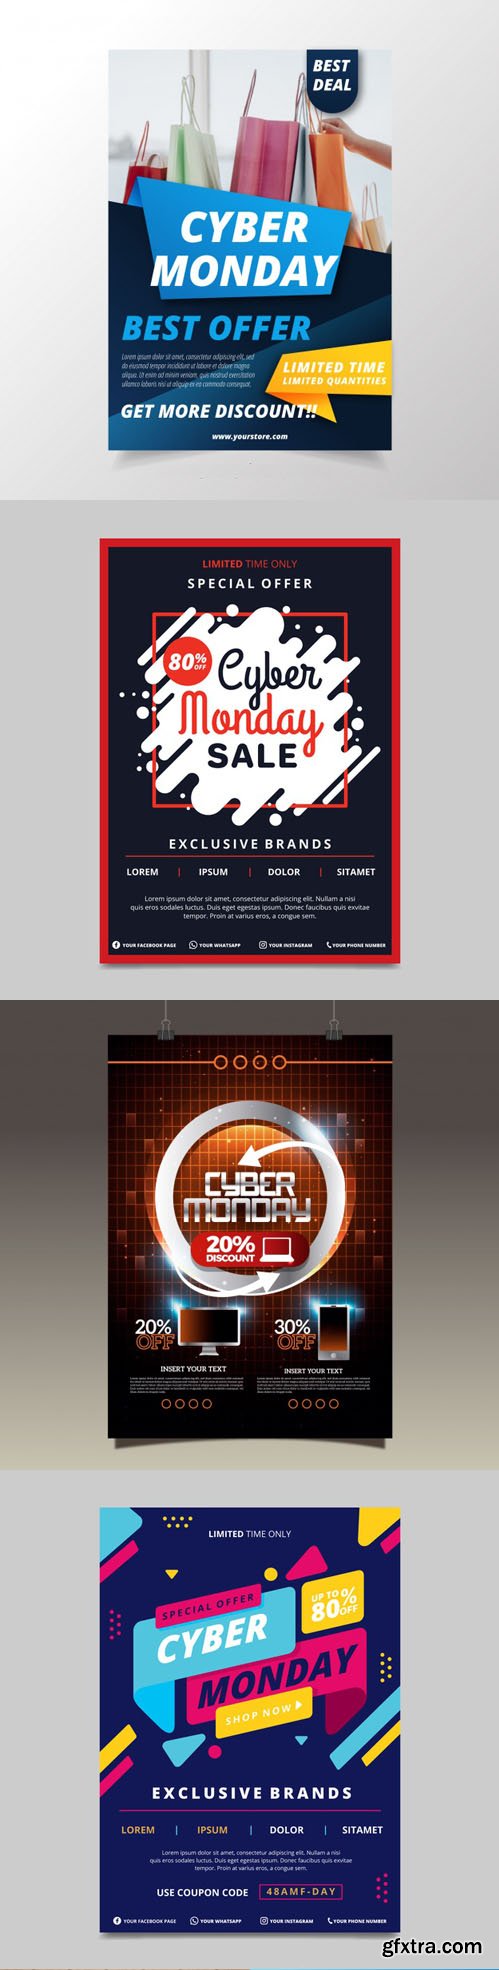 Cyber Monday Offers Flyers Vector Collection